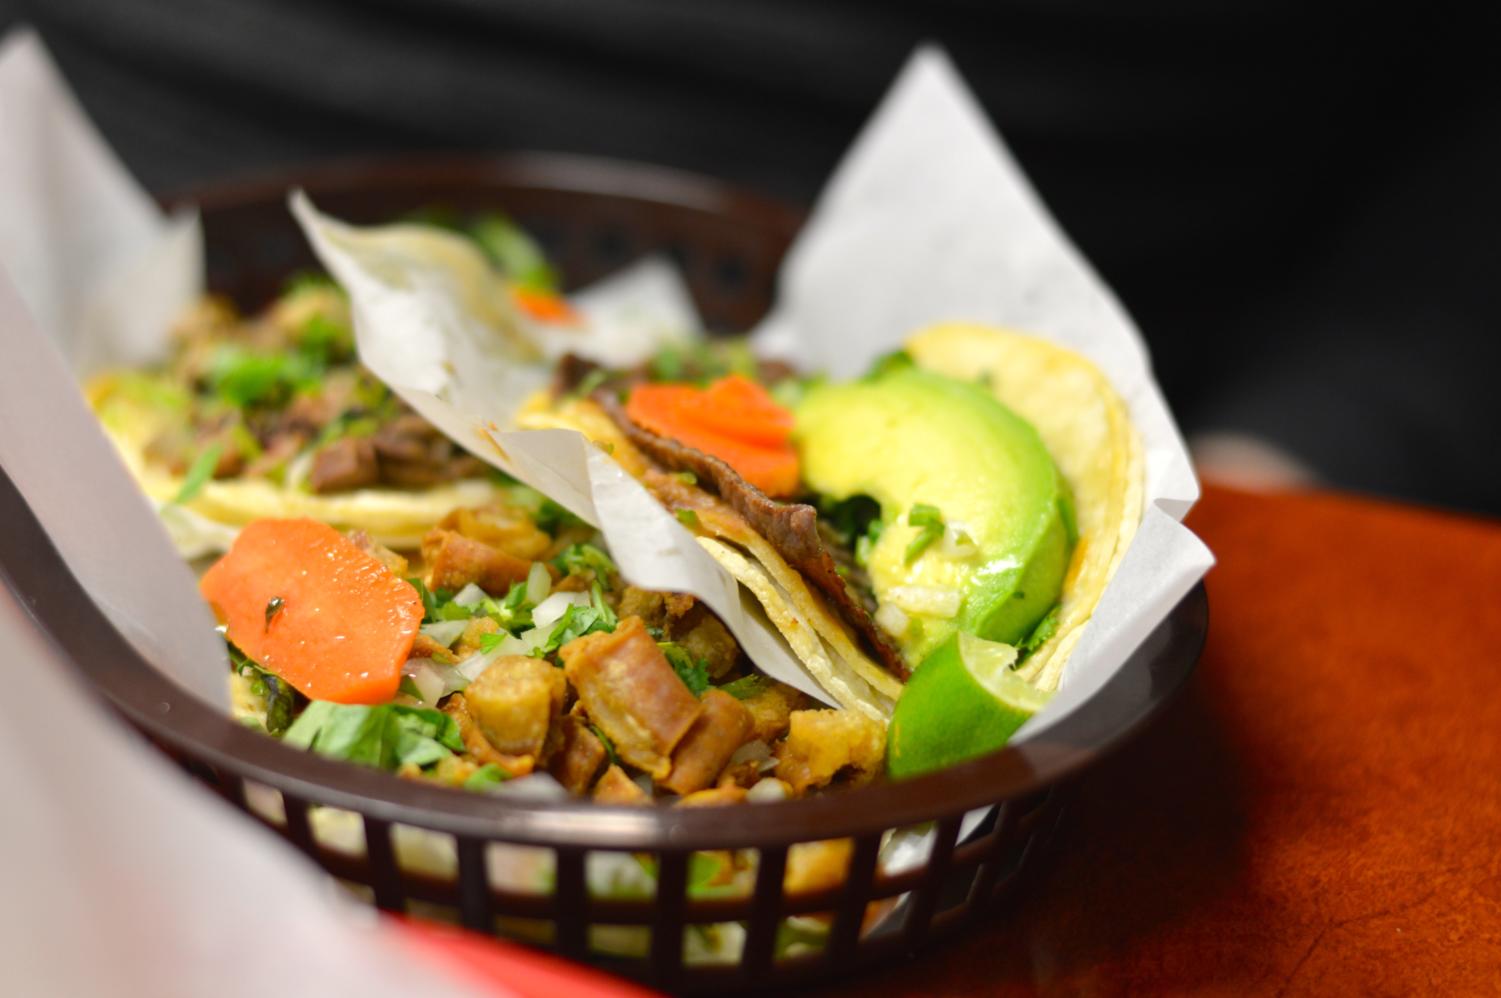 Taqueria Los Comales serves value and variety in its taco selection—load ‘em up with toppings! 